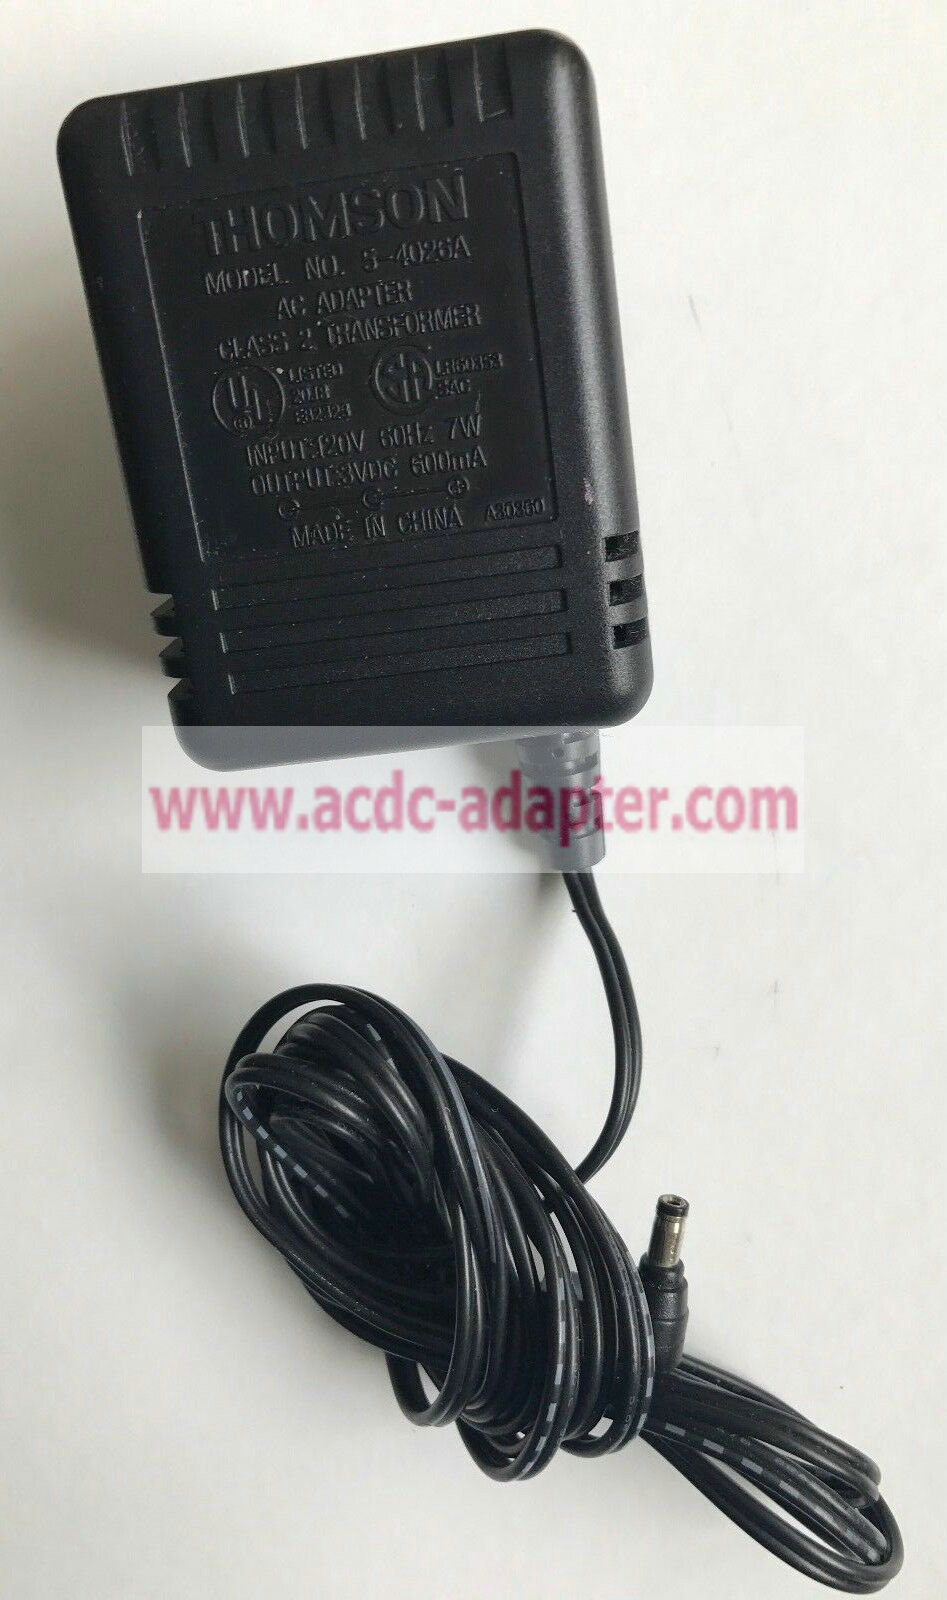 New Thomson 5-4026A 3V 600mA AC Adapter Power Supply - Click Image to Close